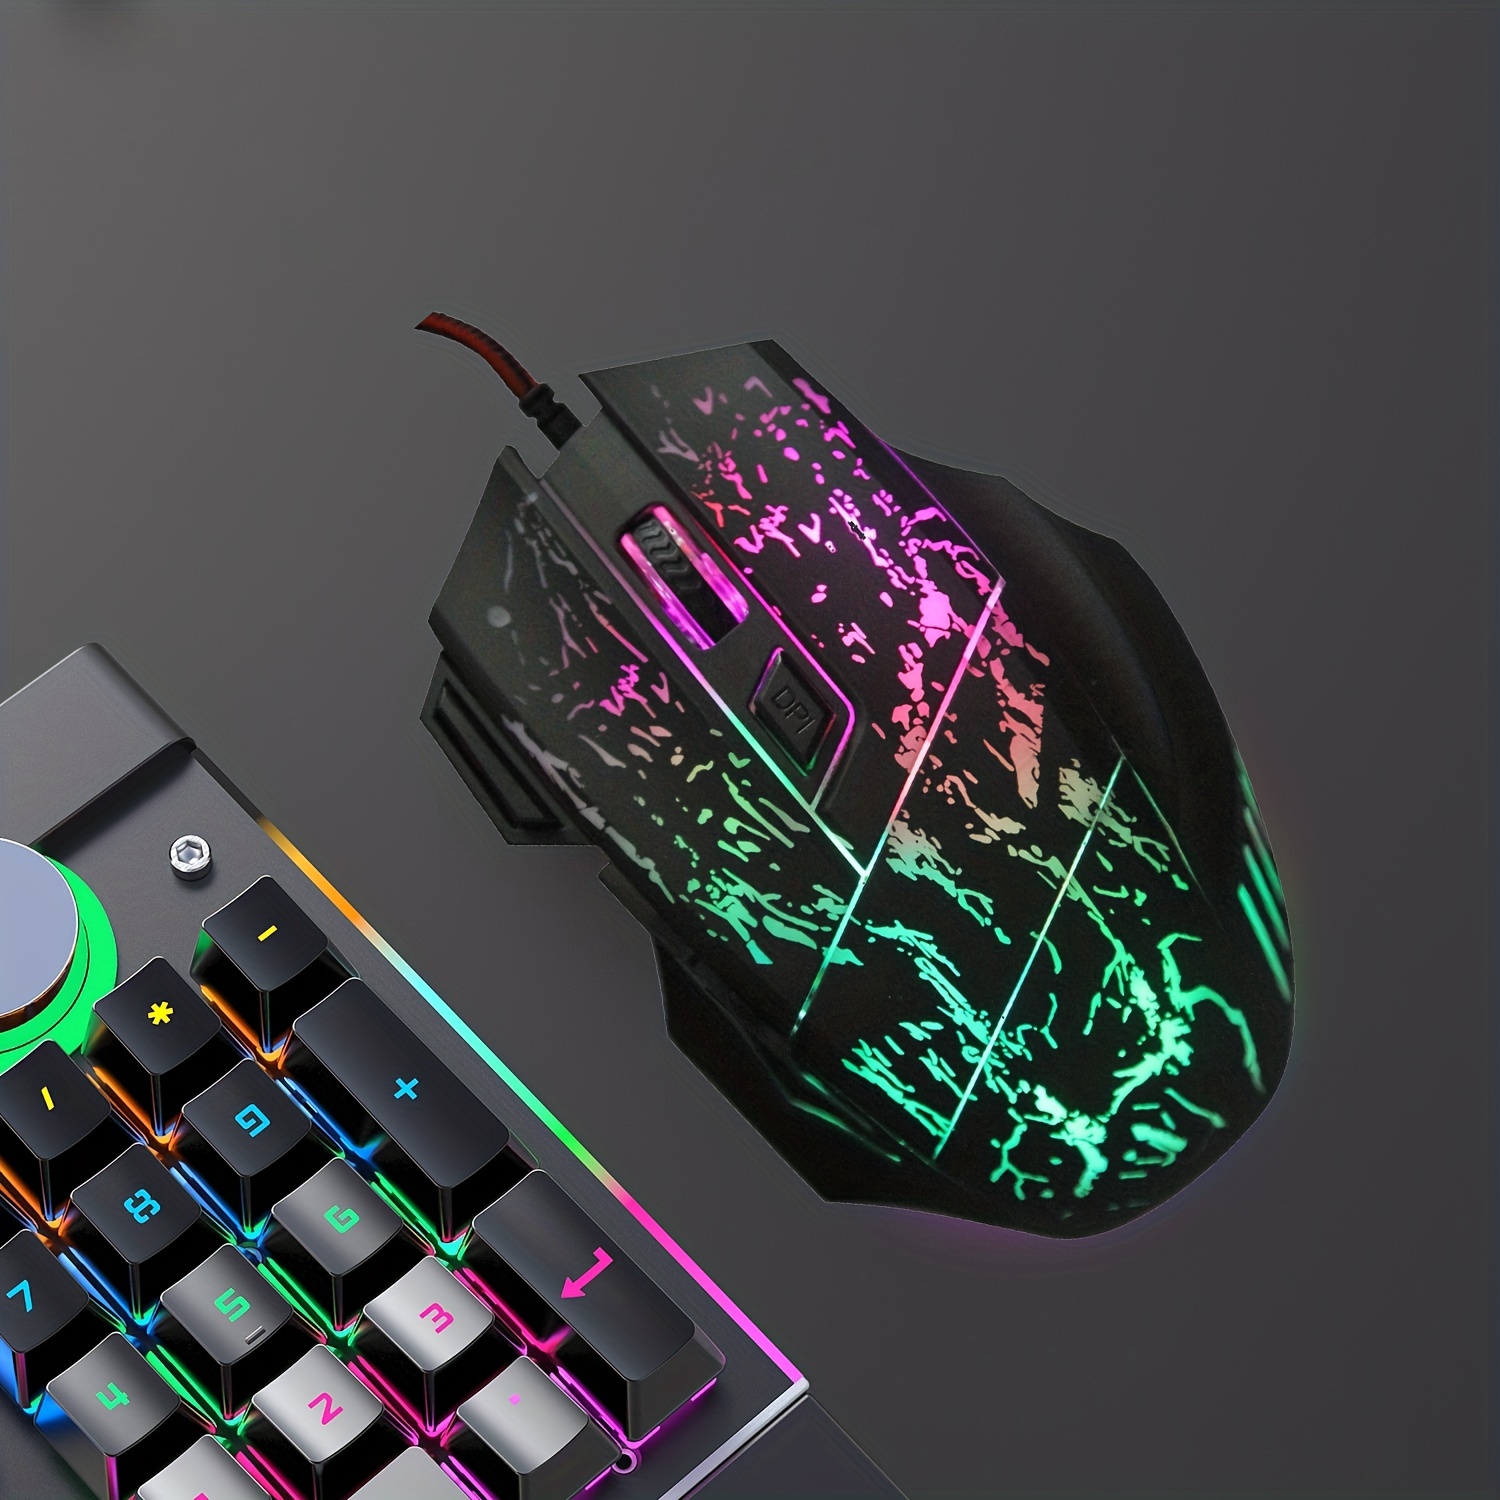 

Hxsj Exploding Cracked Rainbow Light Gaming Mouse, A Gaming Mouse With 7 Buttons, Capable Of Reaching Up To 3200dpi